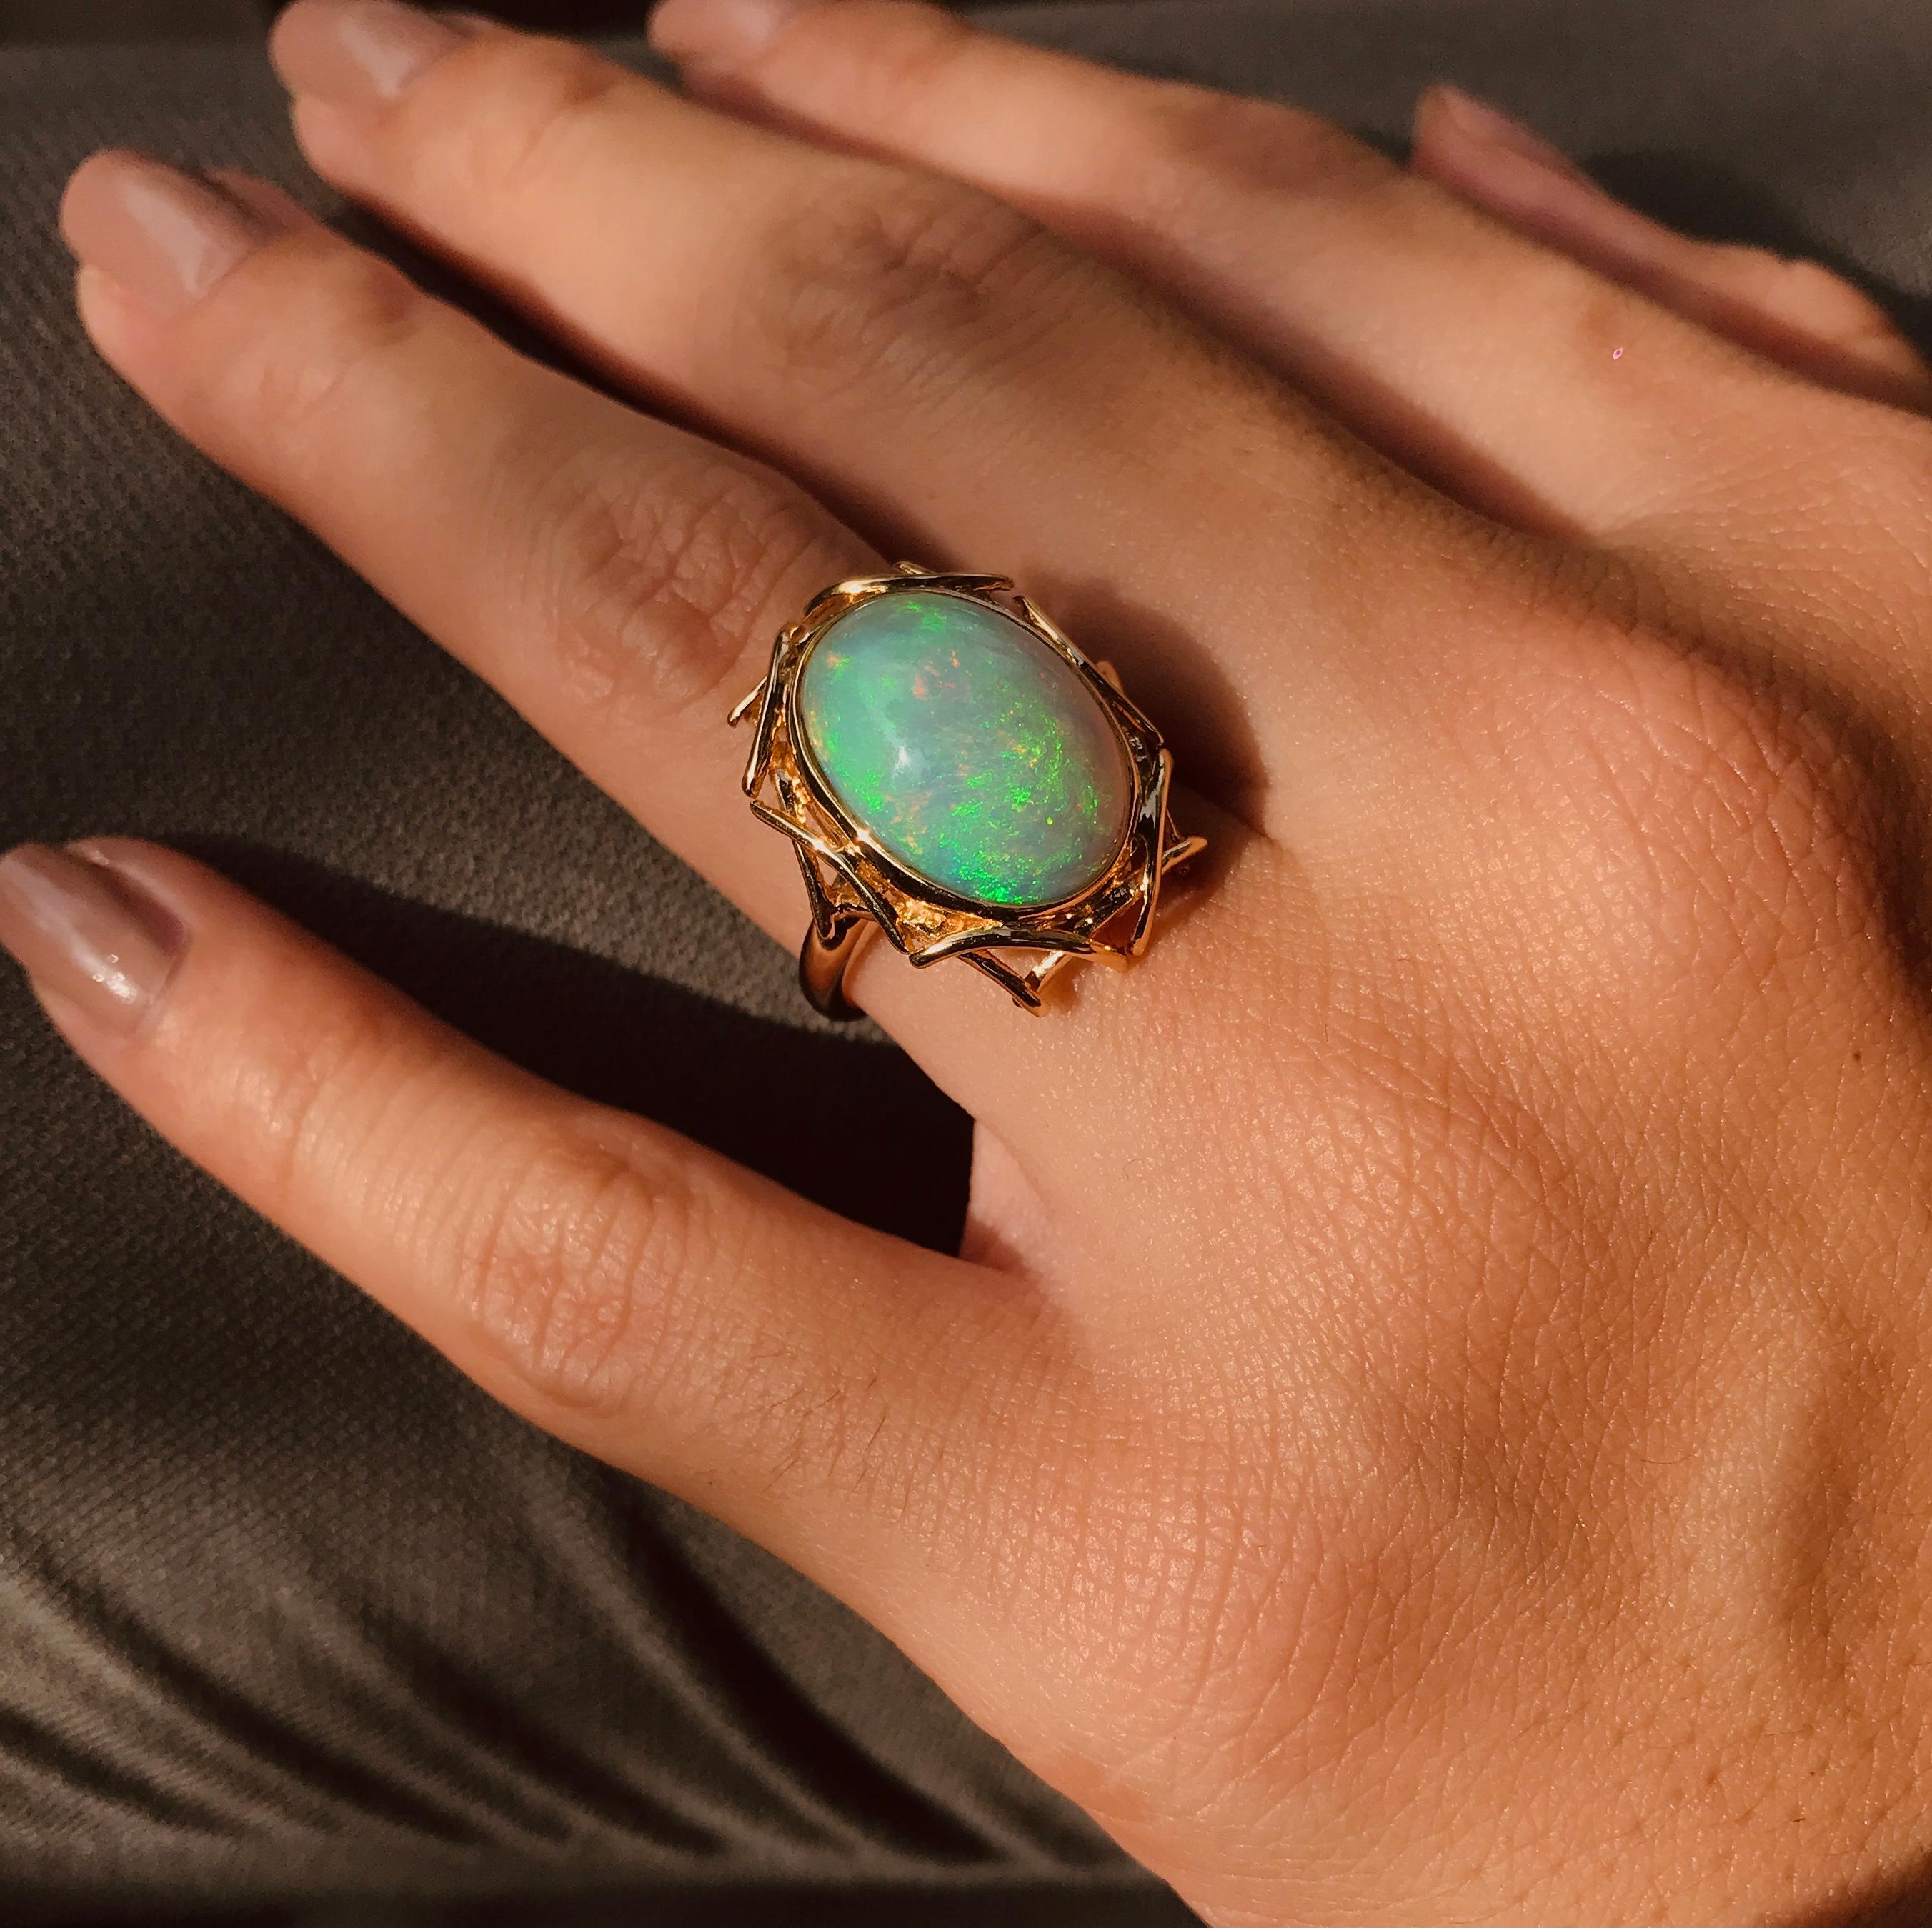 Delicate lines are wound in an oval motion to create elegant yet contemporary bird’s nest design. The Ethiopian Opal represents an egg in the nest, all set in 18k yellow gold. 

Ring Information
Metal: 18K Yellow Gold
Total weight: 8.48 g. (approx.